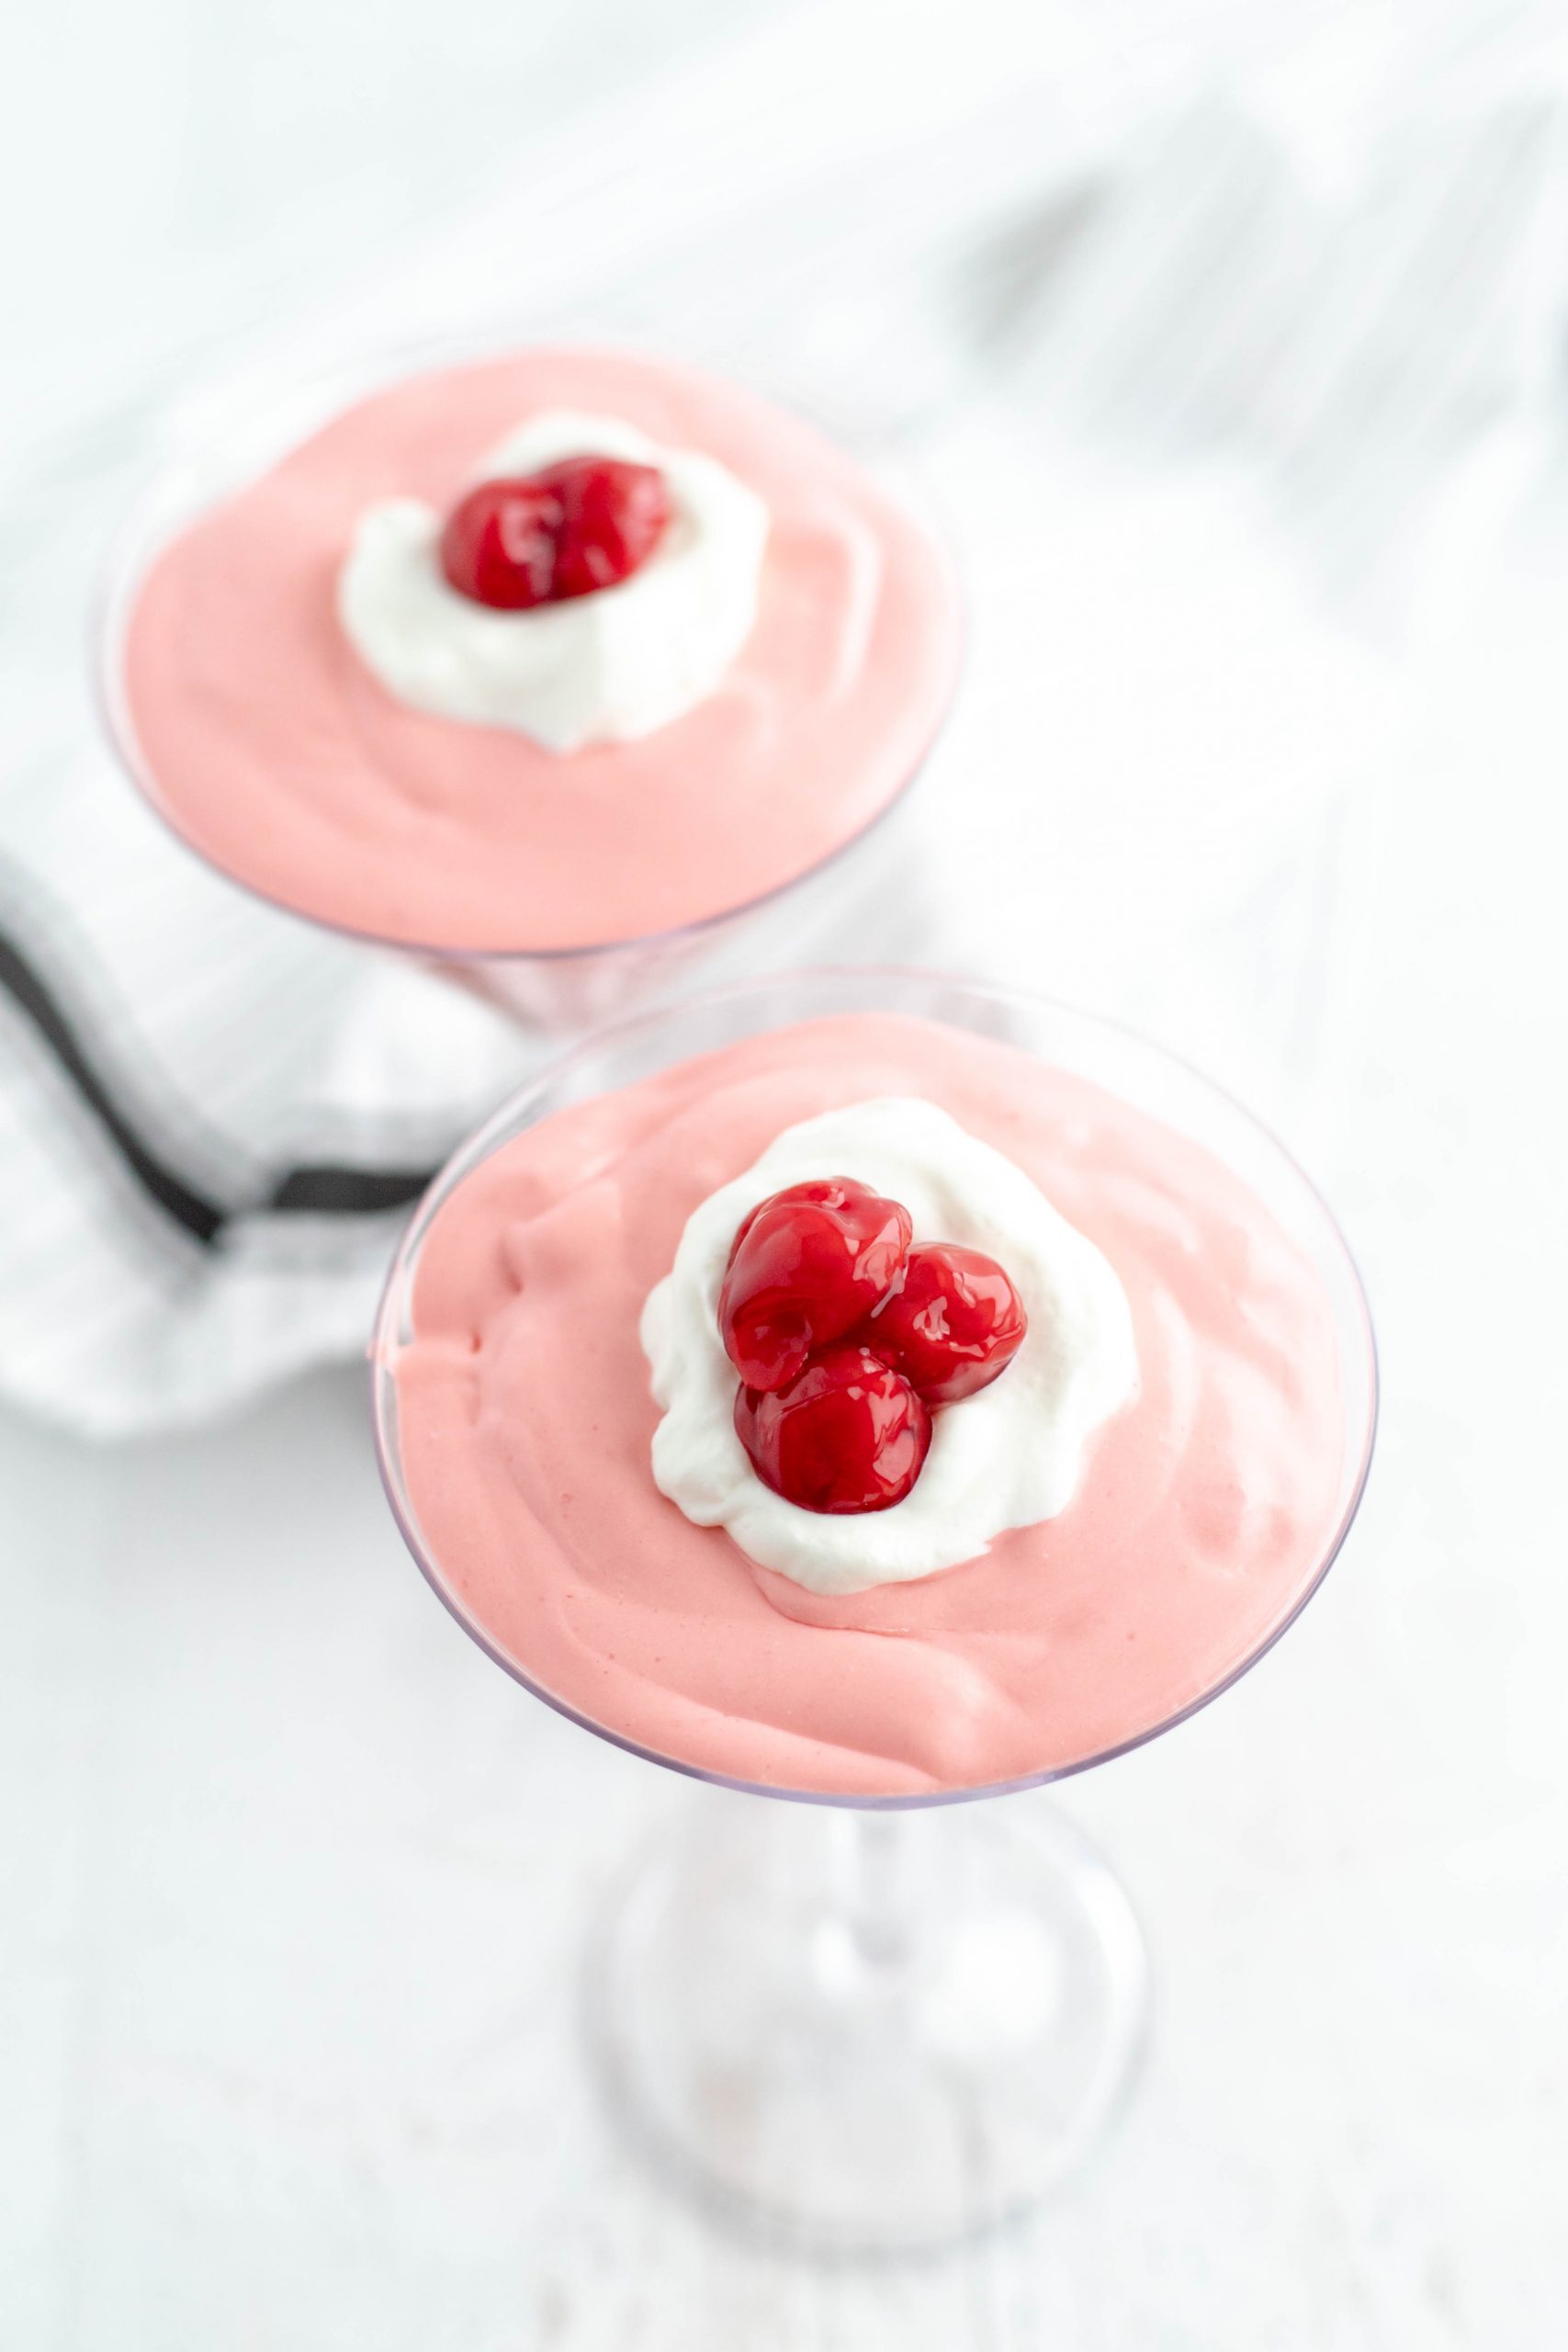 Dessert cups with cherry mousse topped with whipped cream and cherries